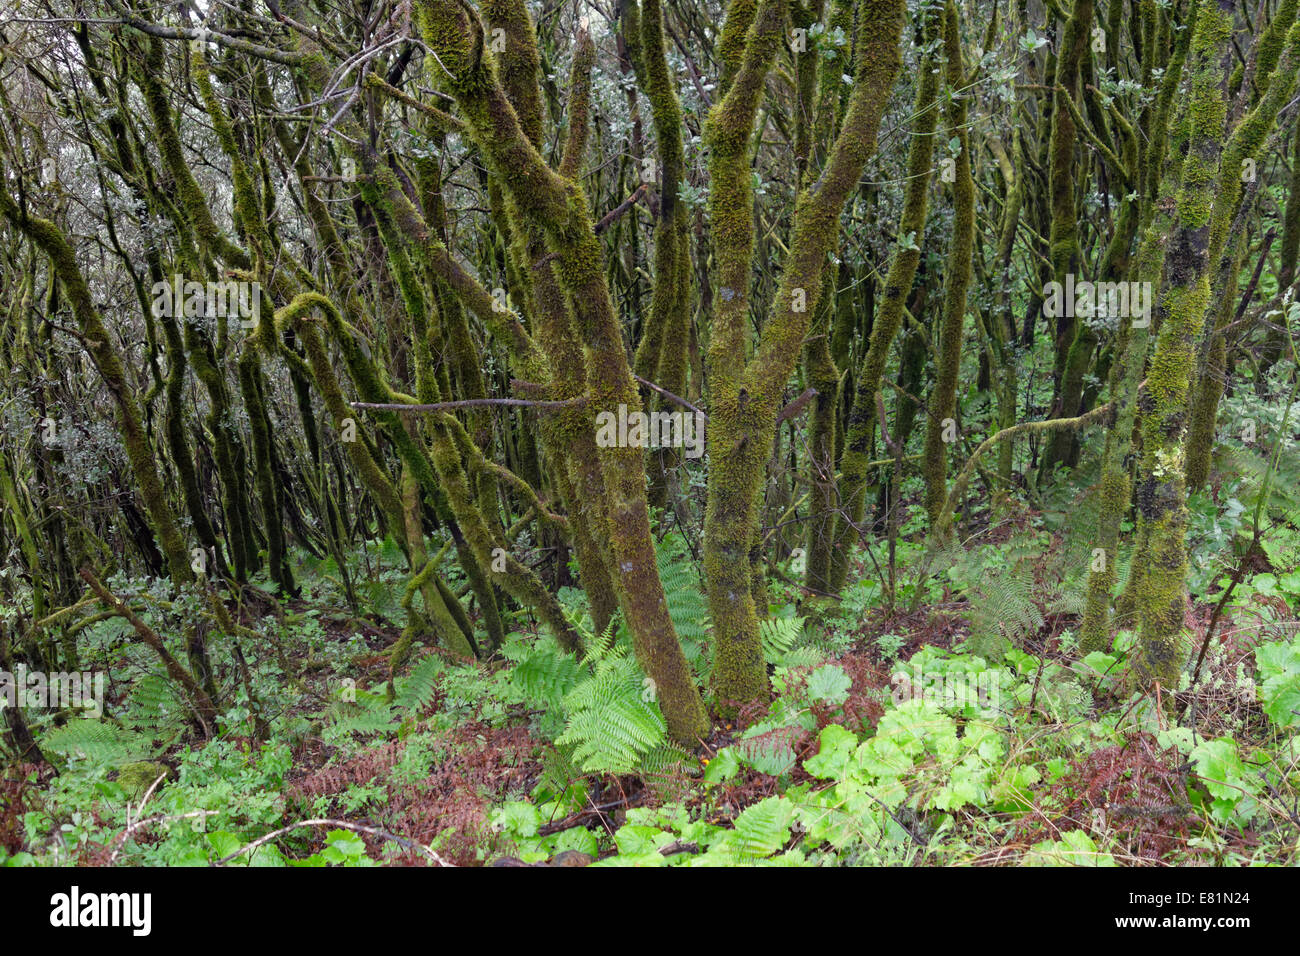 Moss-covered tree trunks in the cloud forest, Cumbre Nueva, La Palma, Canary Islands, Spain Stock Photo